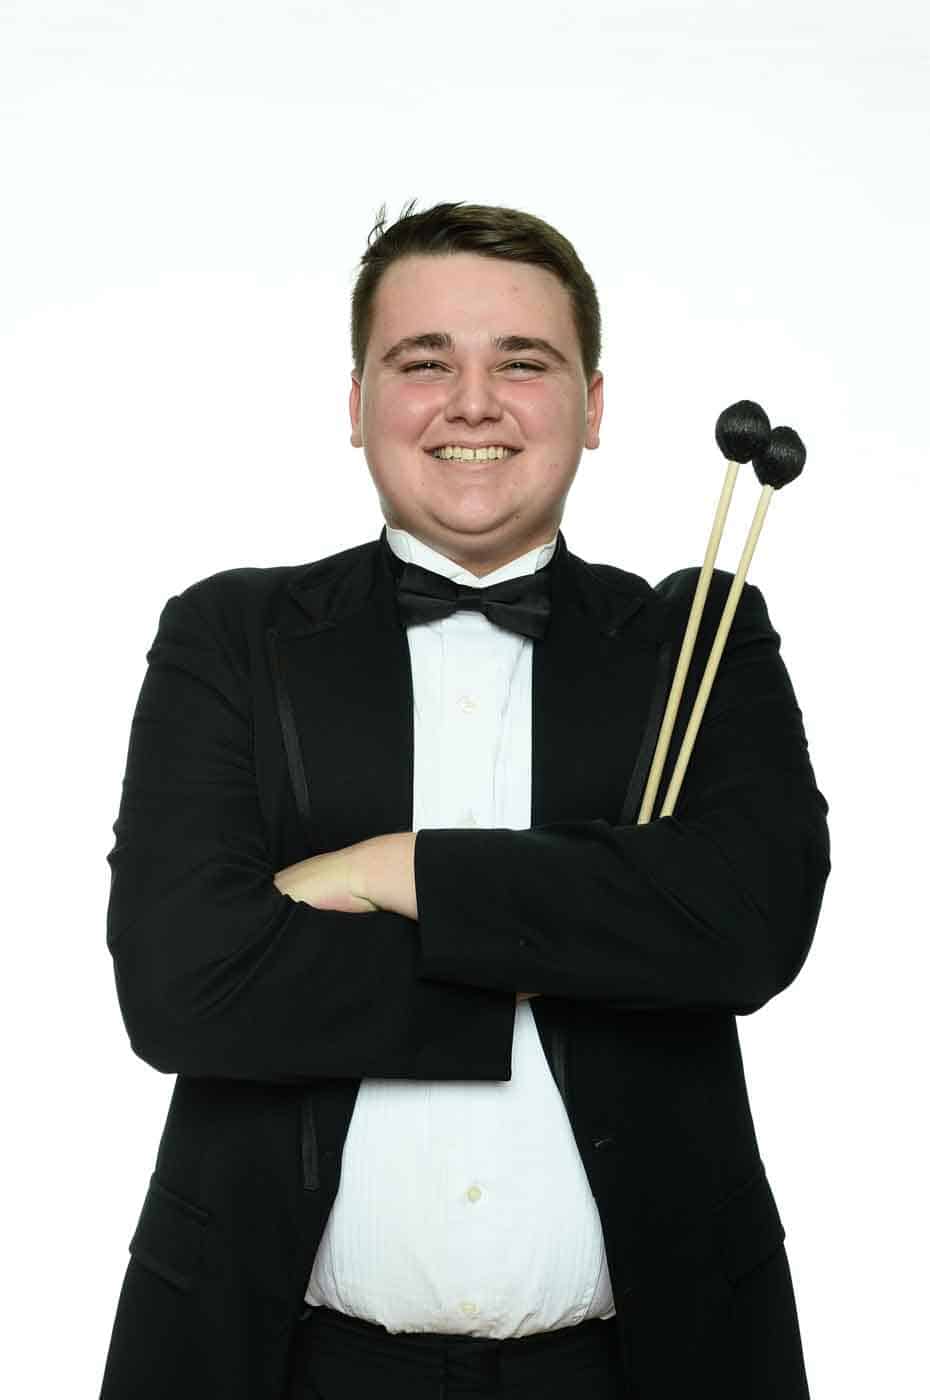 Young boy in suit with drum sticks